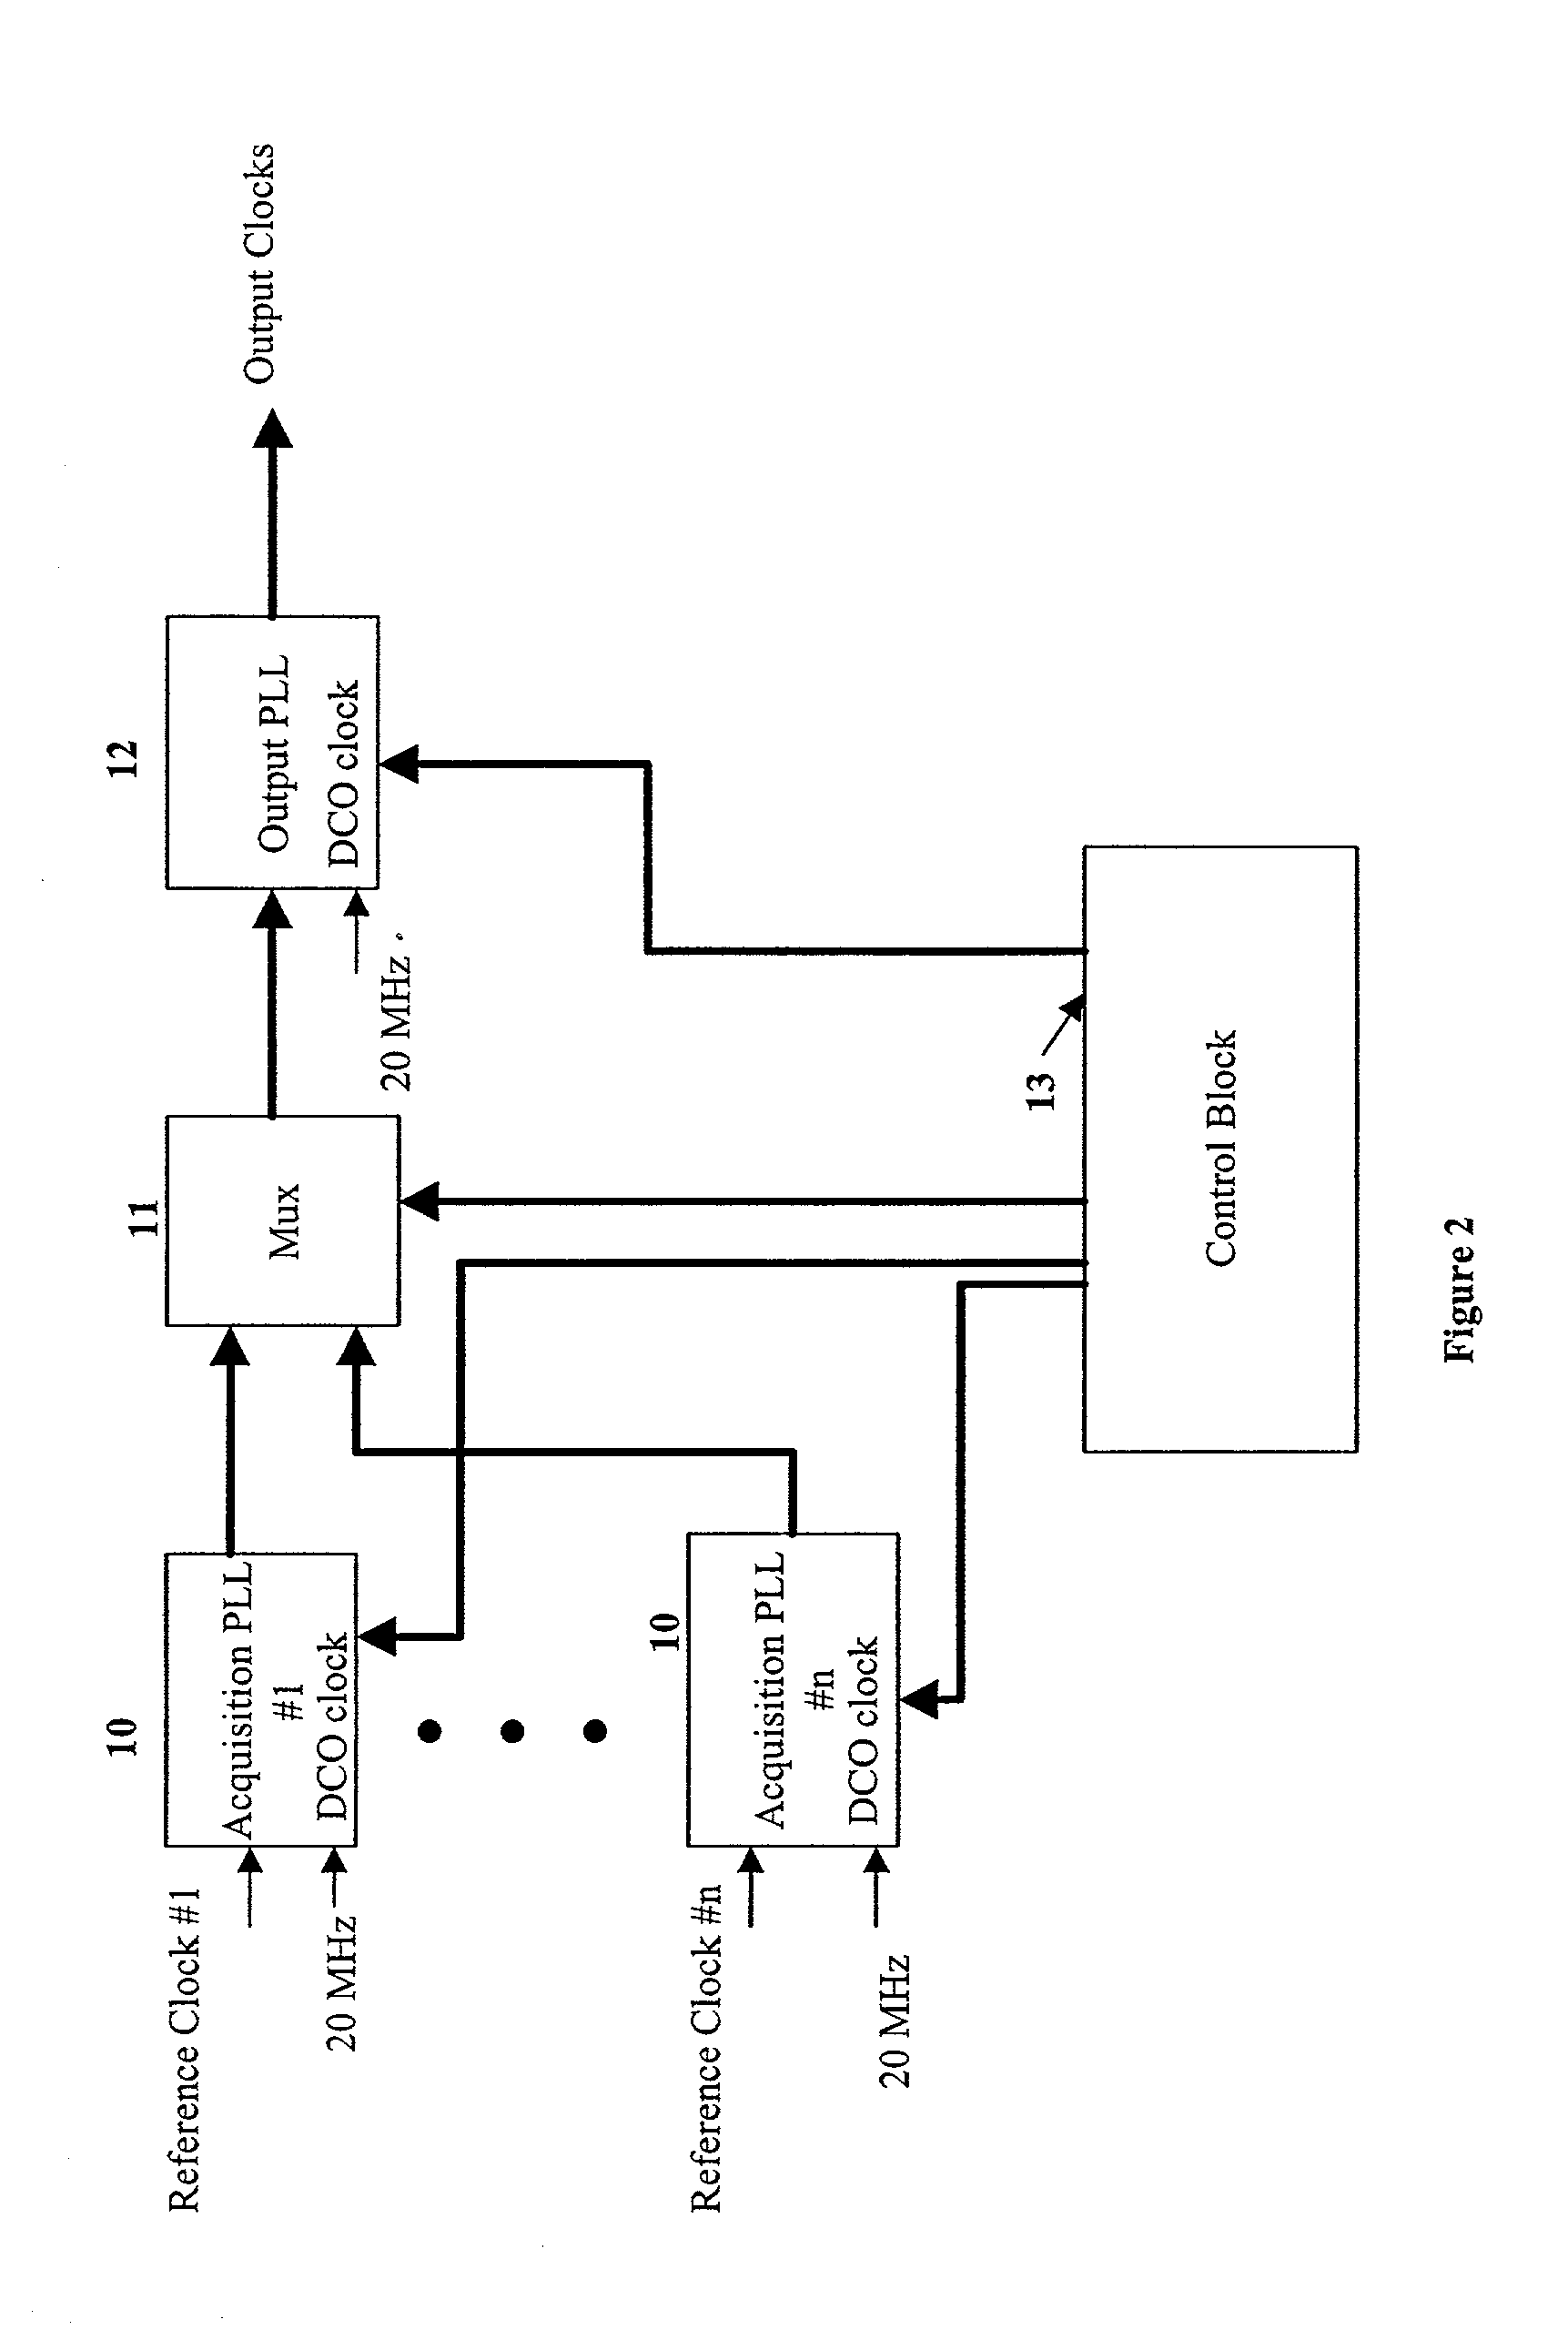 Multiple input phase lock loop with hitless reference switching